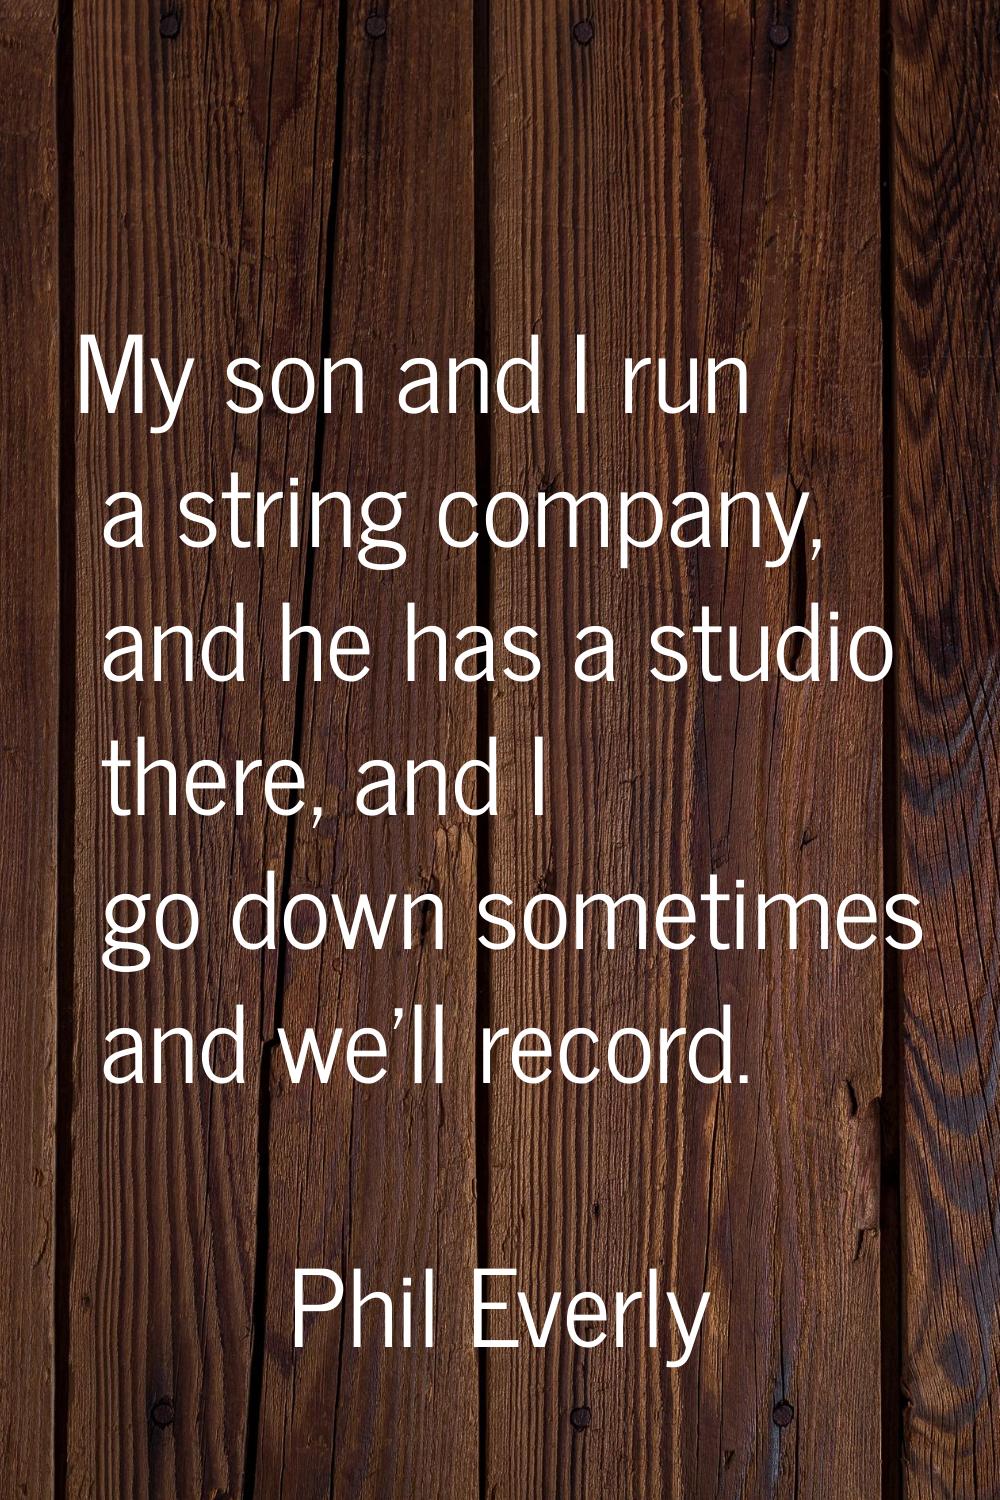 My son and I run a string company, and he has a studio there, and I go down sometimes and we'll rec